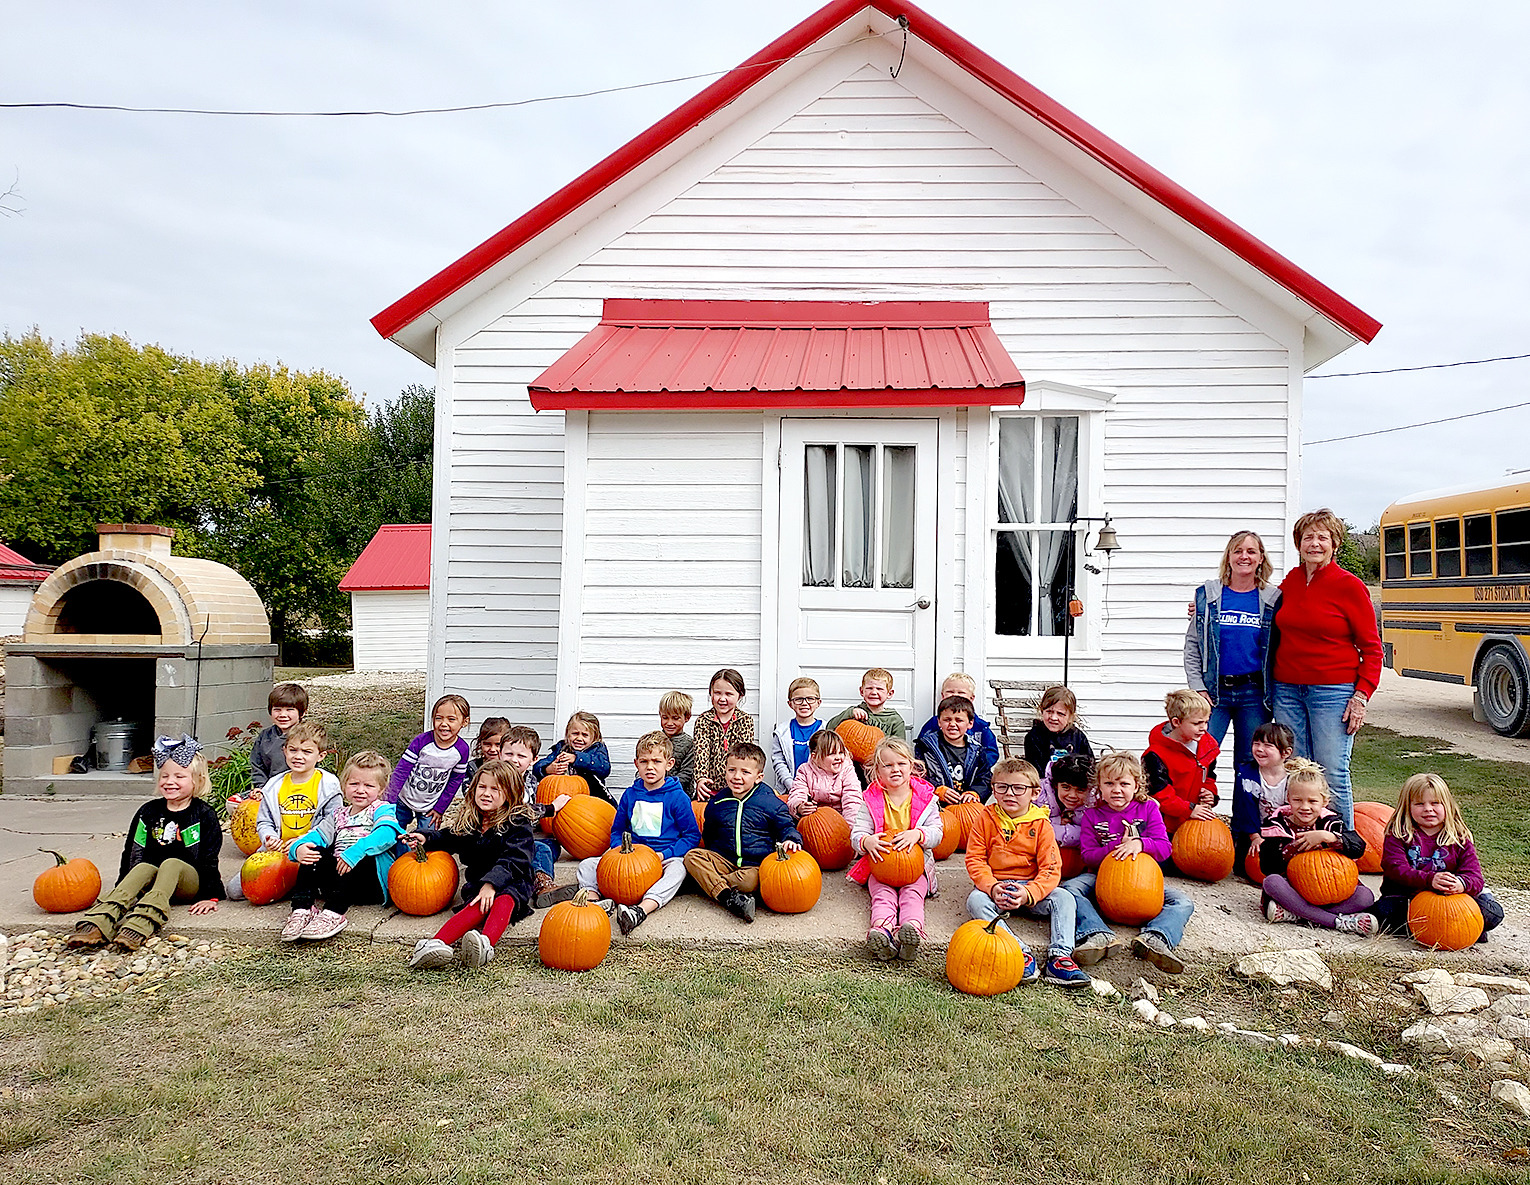 THE STOCKTON THREE- AND FOUR-YEAR-OLD CLASSES of Mrs. Beth Hazen and Mrs. Christine Hamel enjoyed a day at the Prairie View schoolhouse at the O’Grady farm. They learned about what life was like attending a one-room schoolhouse and also enjoying a trip to the pumpkin patch. The two ladies standing to the right are Dawn O’Grady and Joan Balderston.